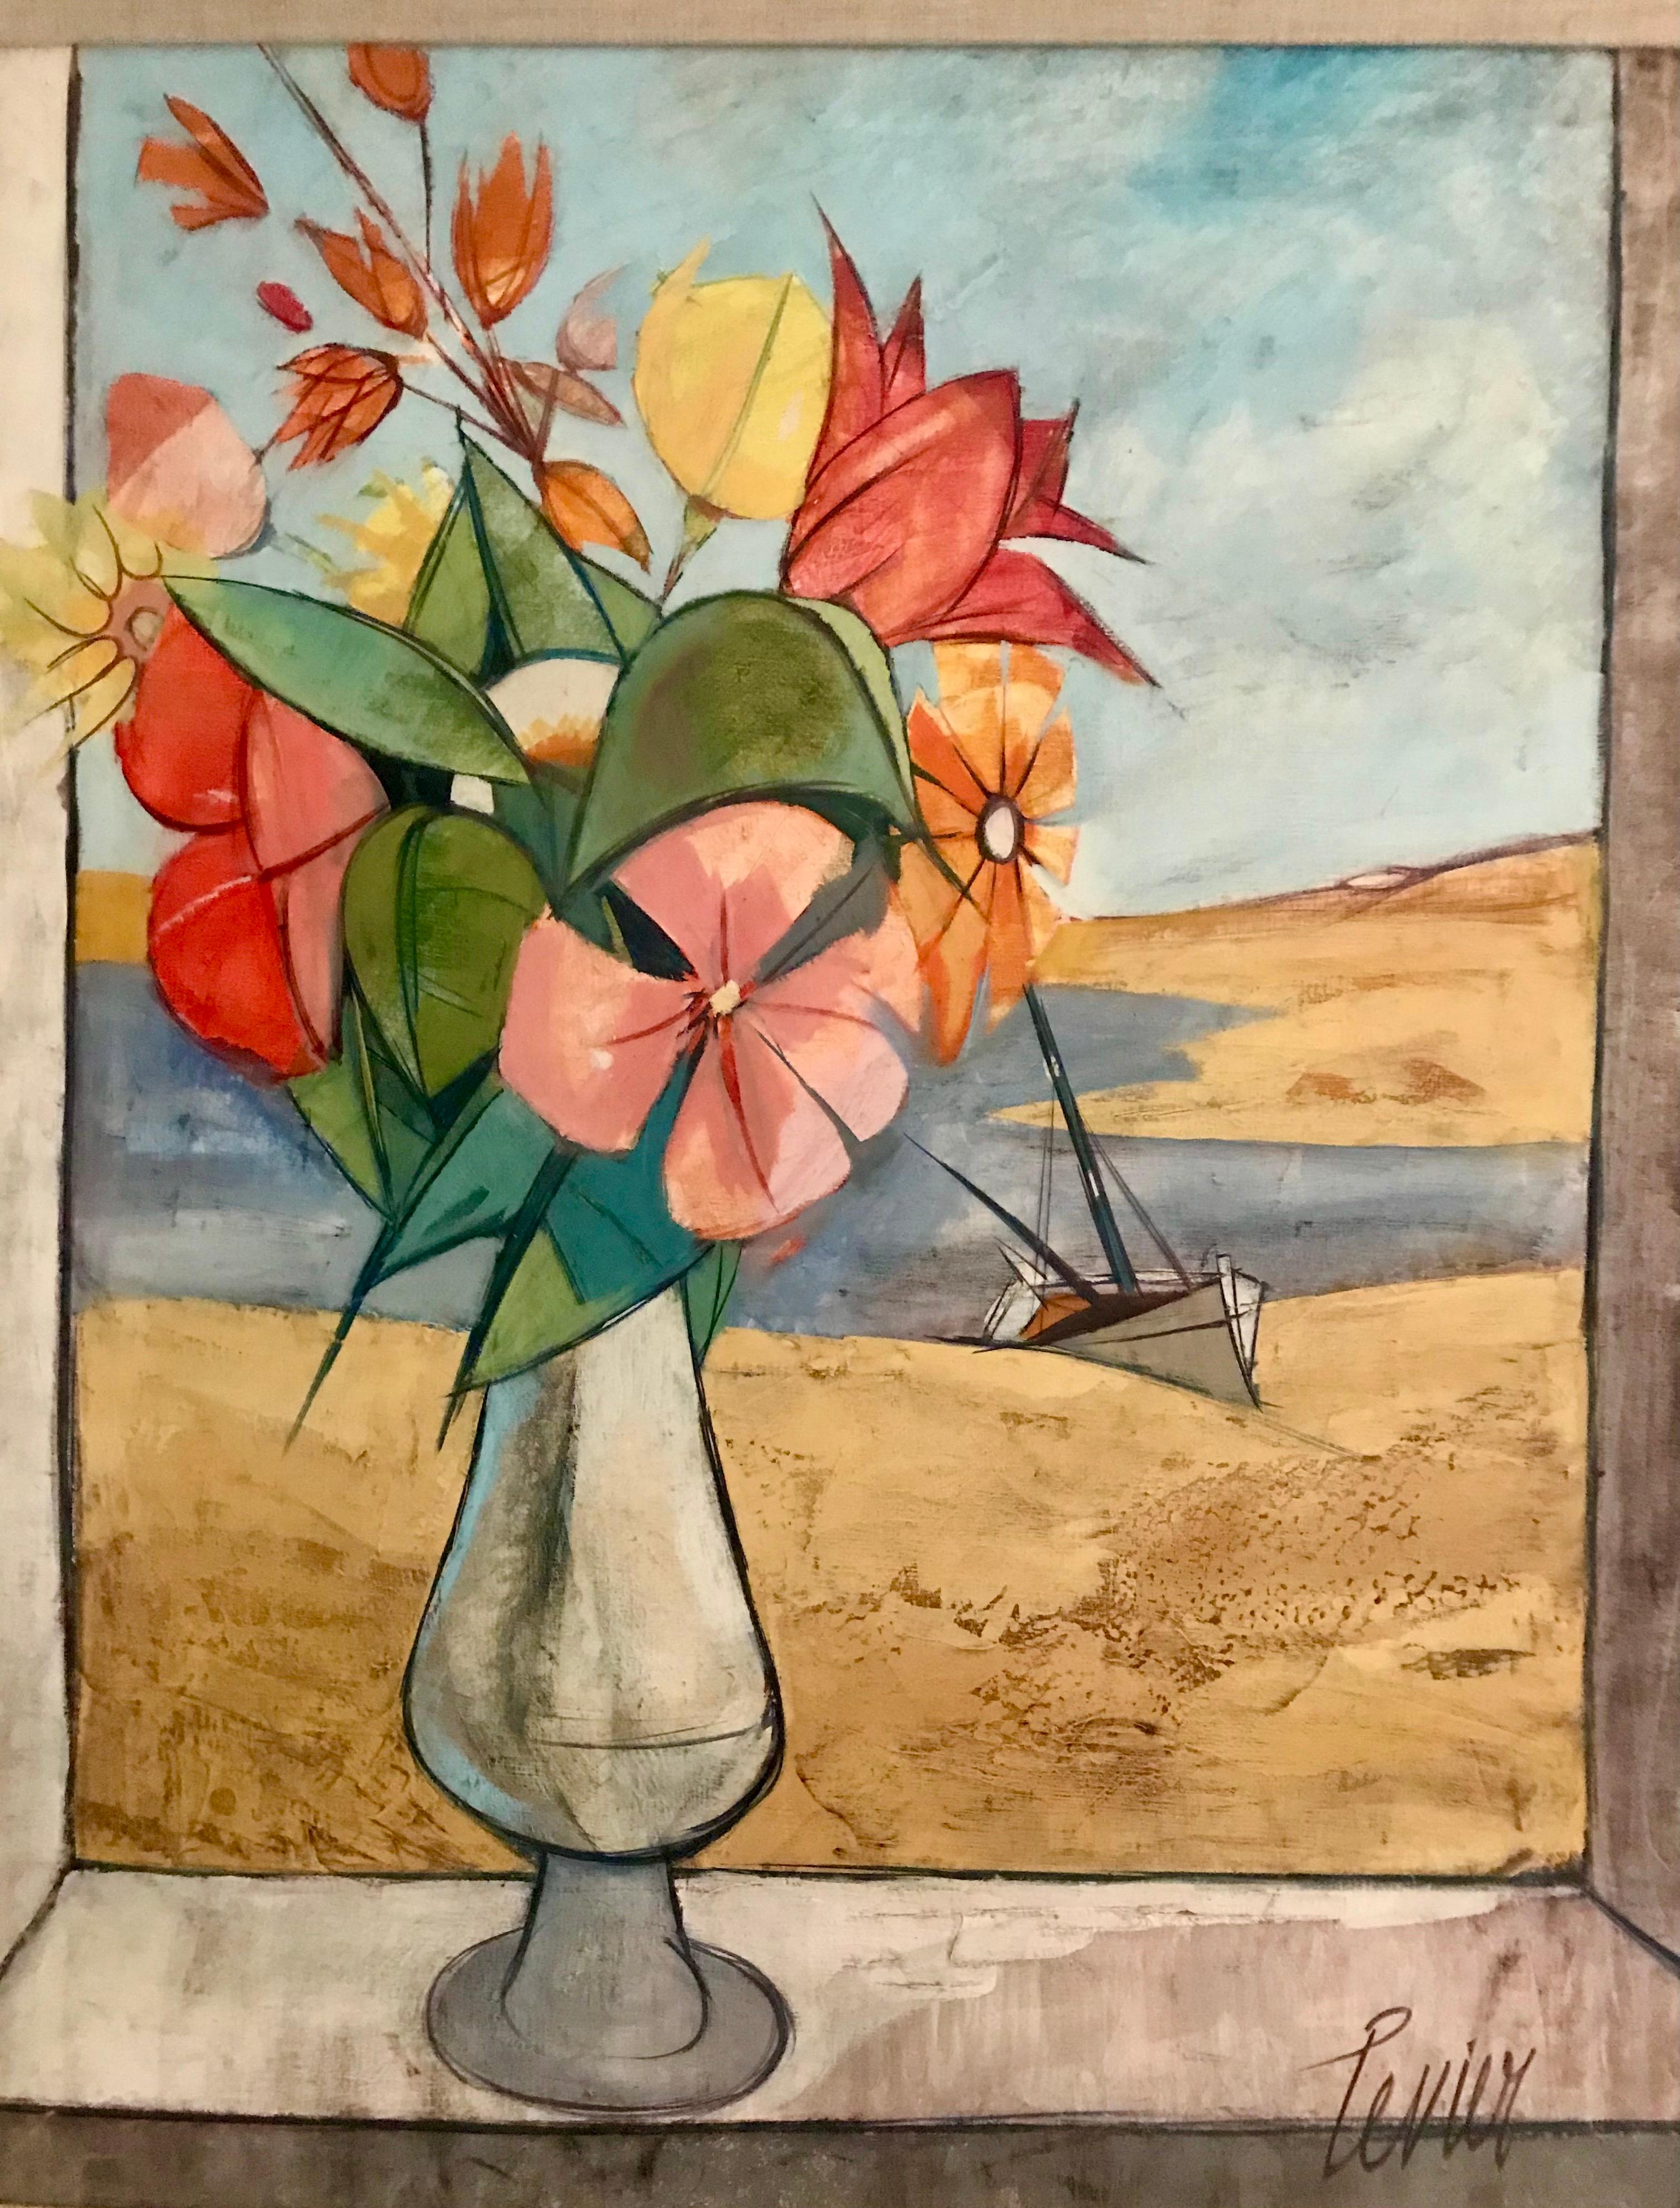 Painted Rare Seascape and Bouquet Oil on Cancas by Charles Levier, 1958